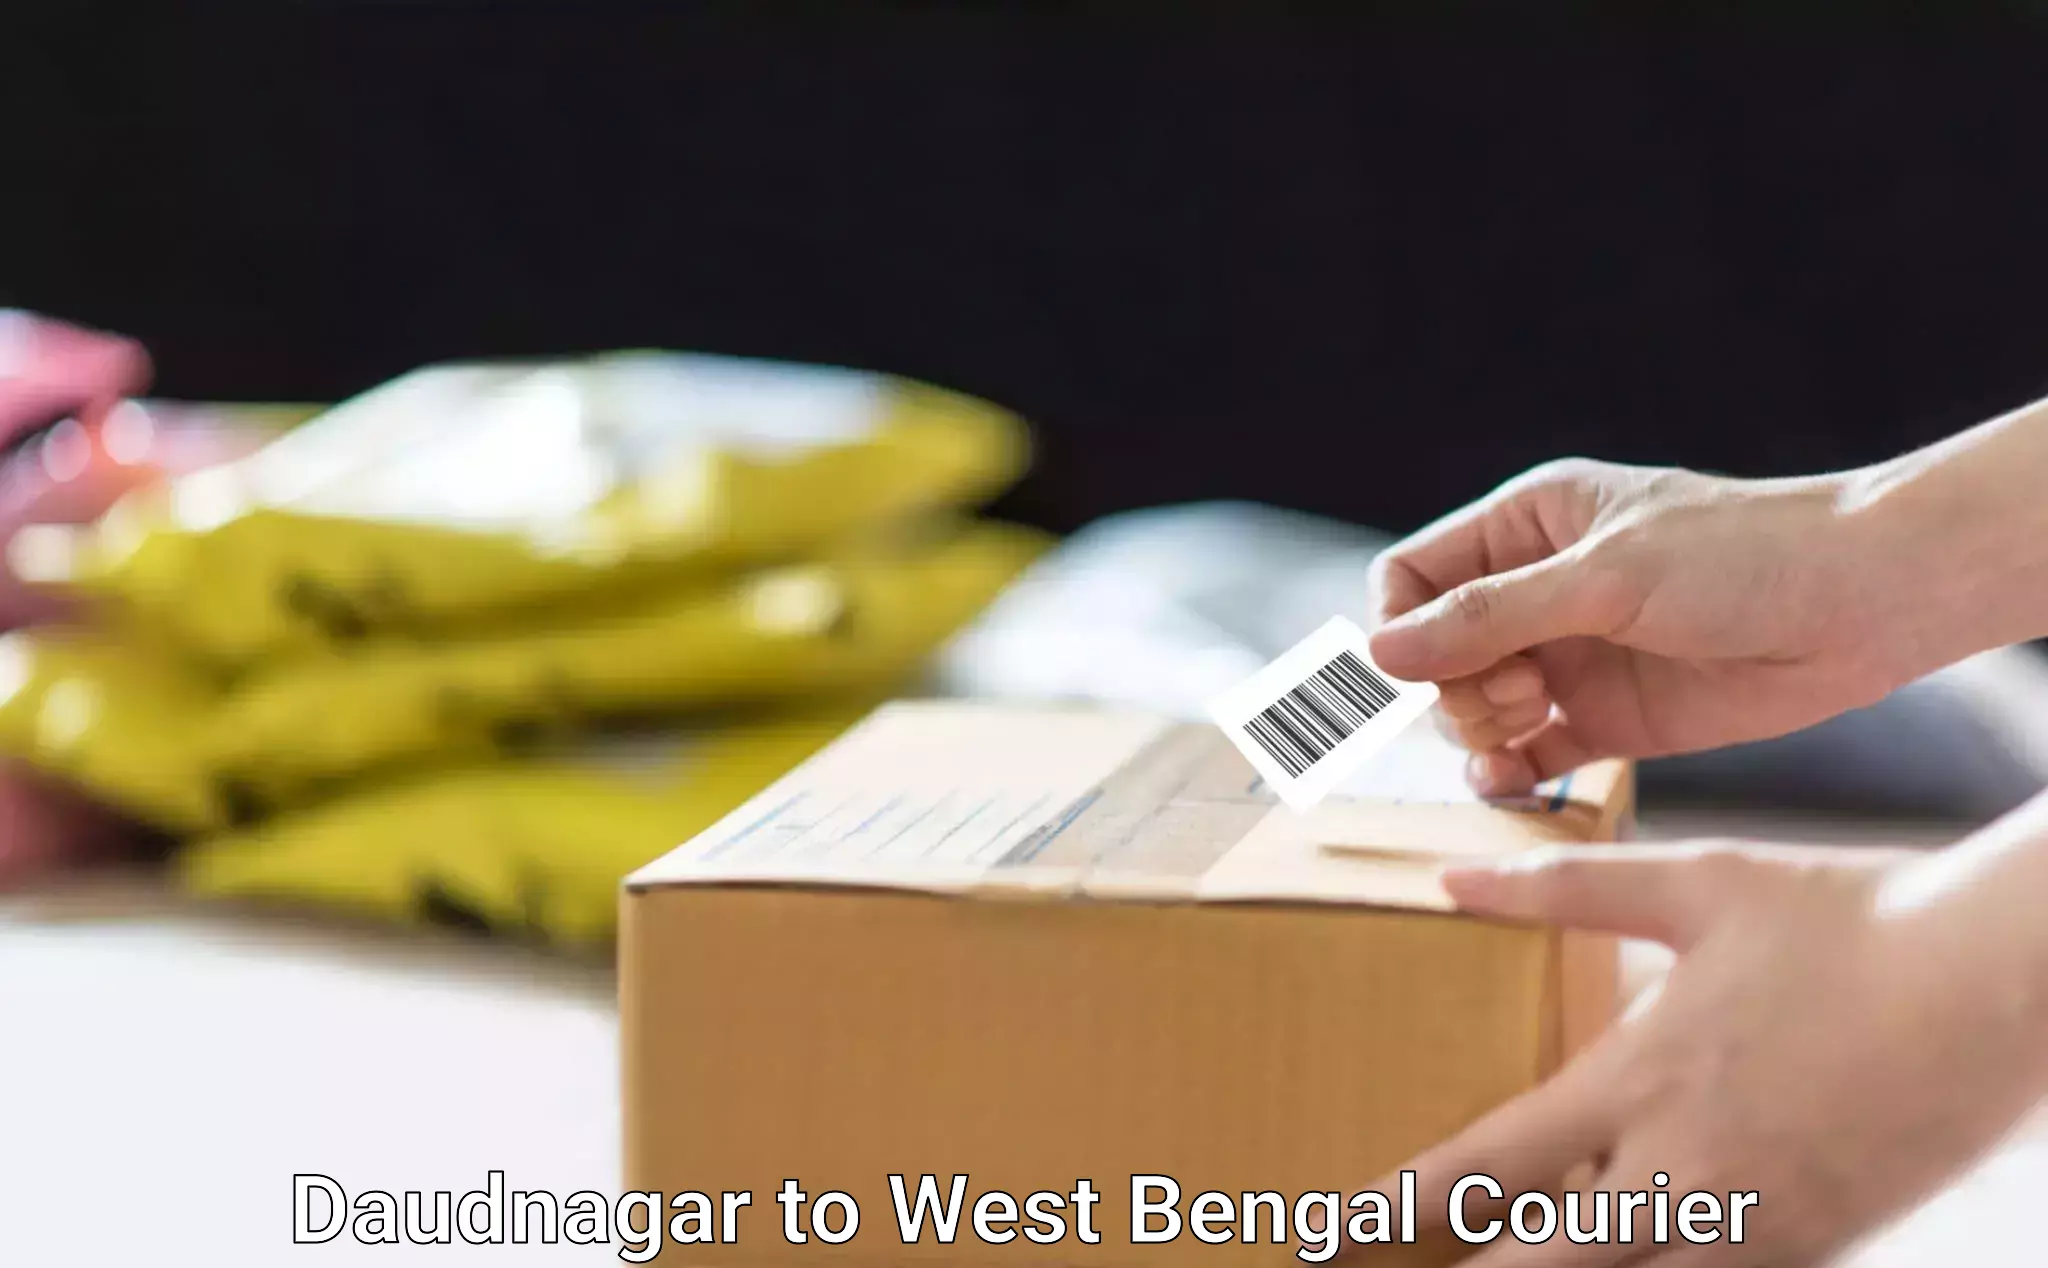 Budget-friendly moving services Daudnagar to West Bengal